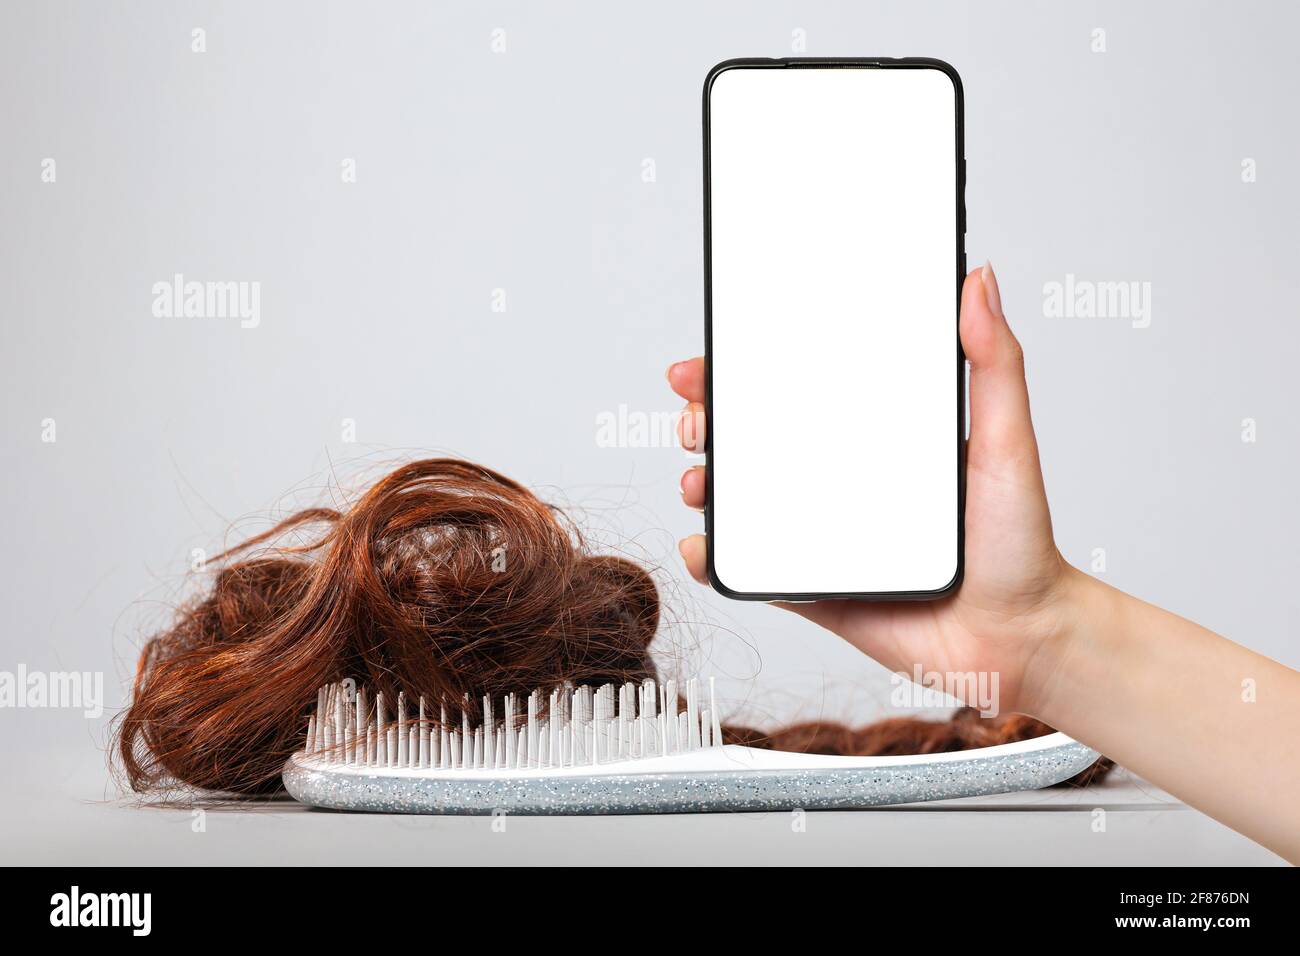 A white comb with false hair. White background. A female's hand holds a smartphone with a white screen. Mock up. The concept of buying and selling hai Stock Photo